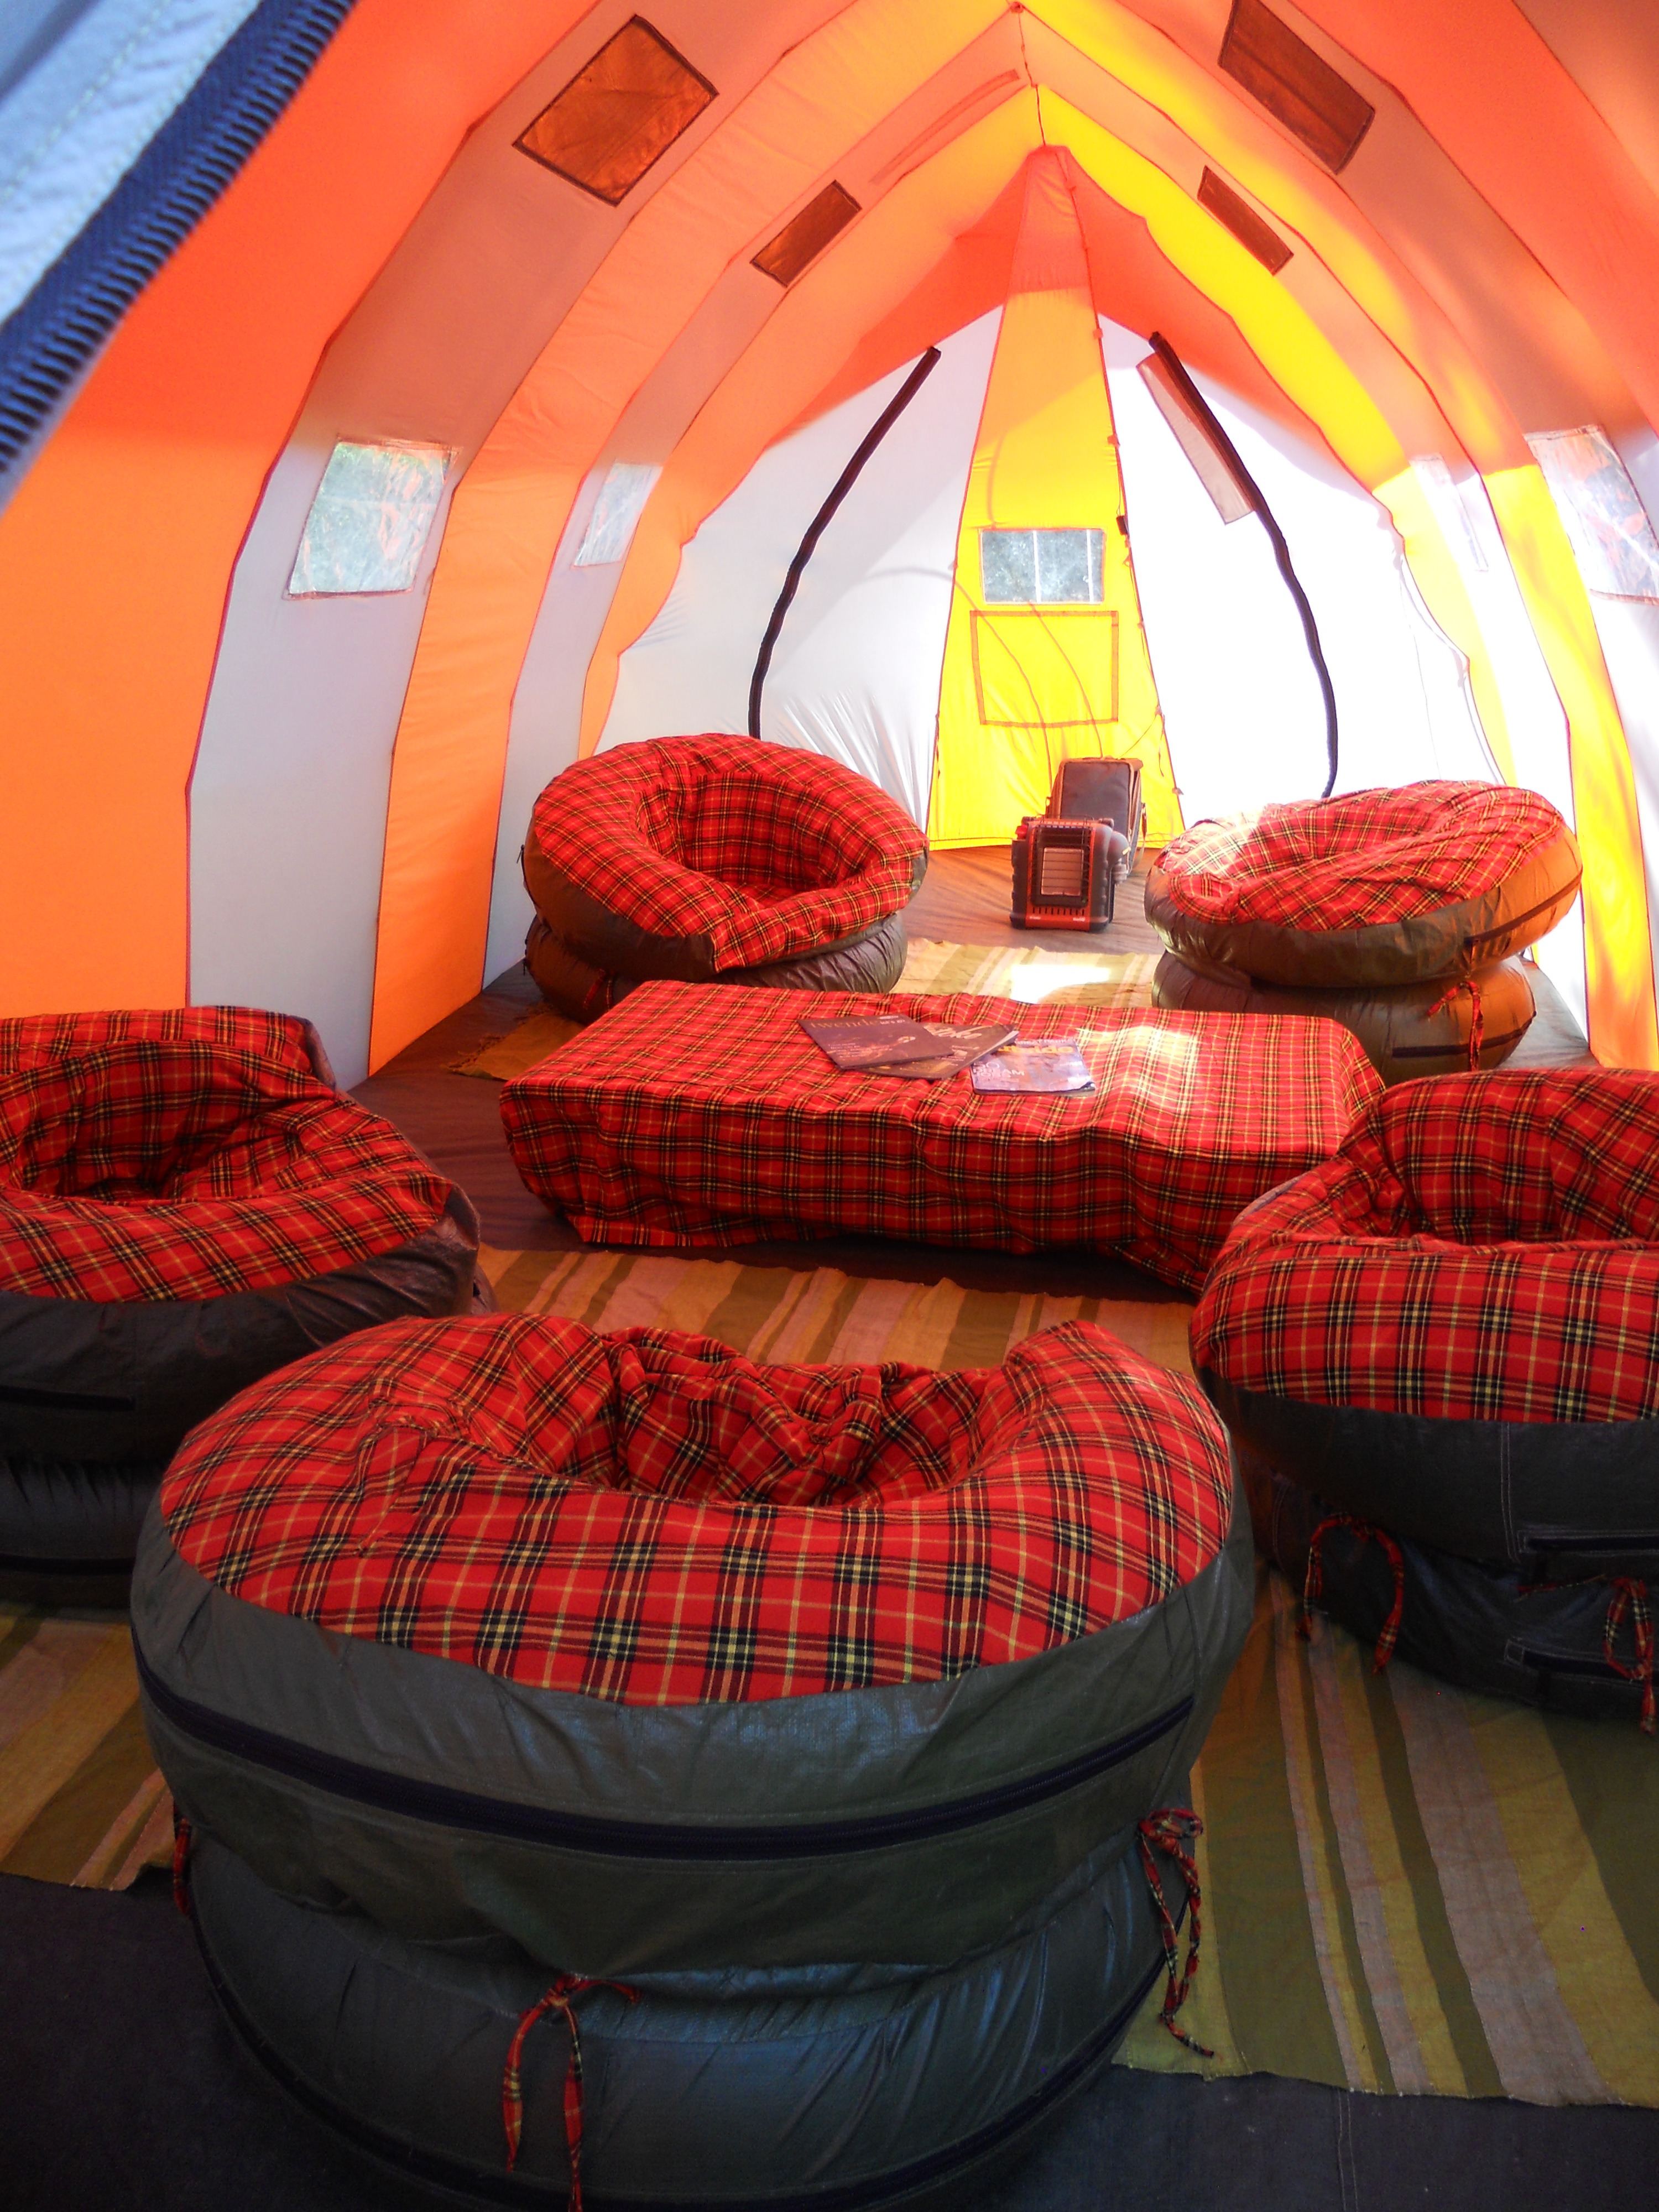 Nature Discovery's new lounge tent for Kilimanjaro treks